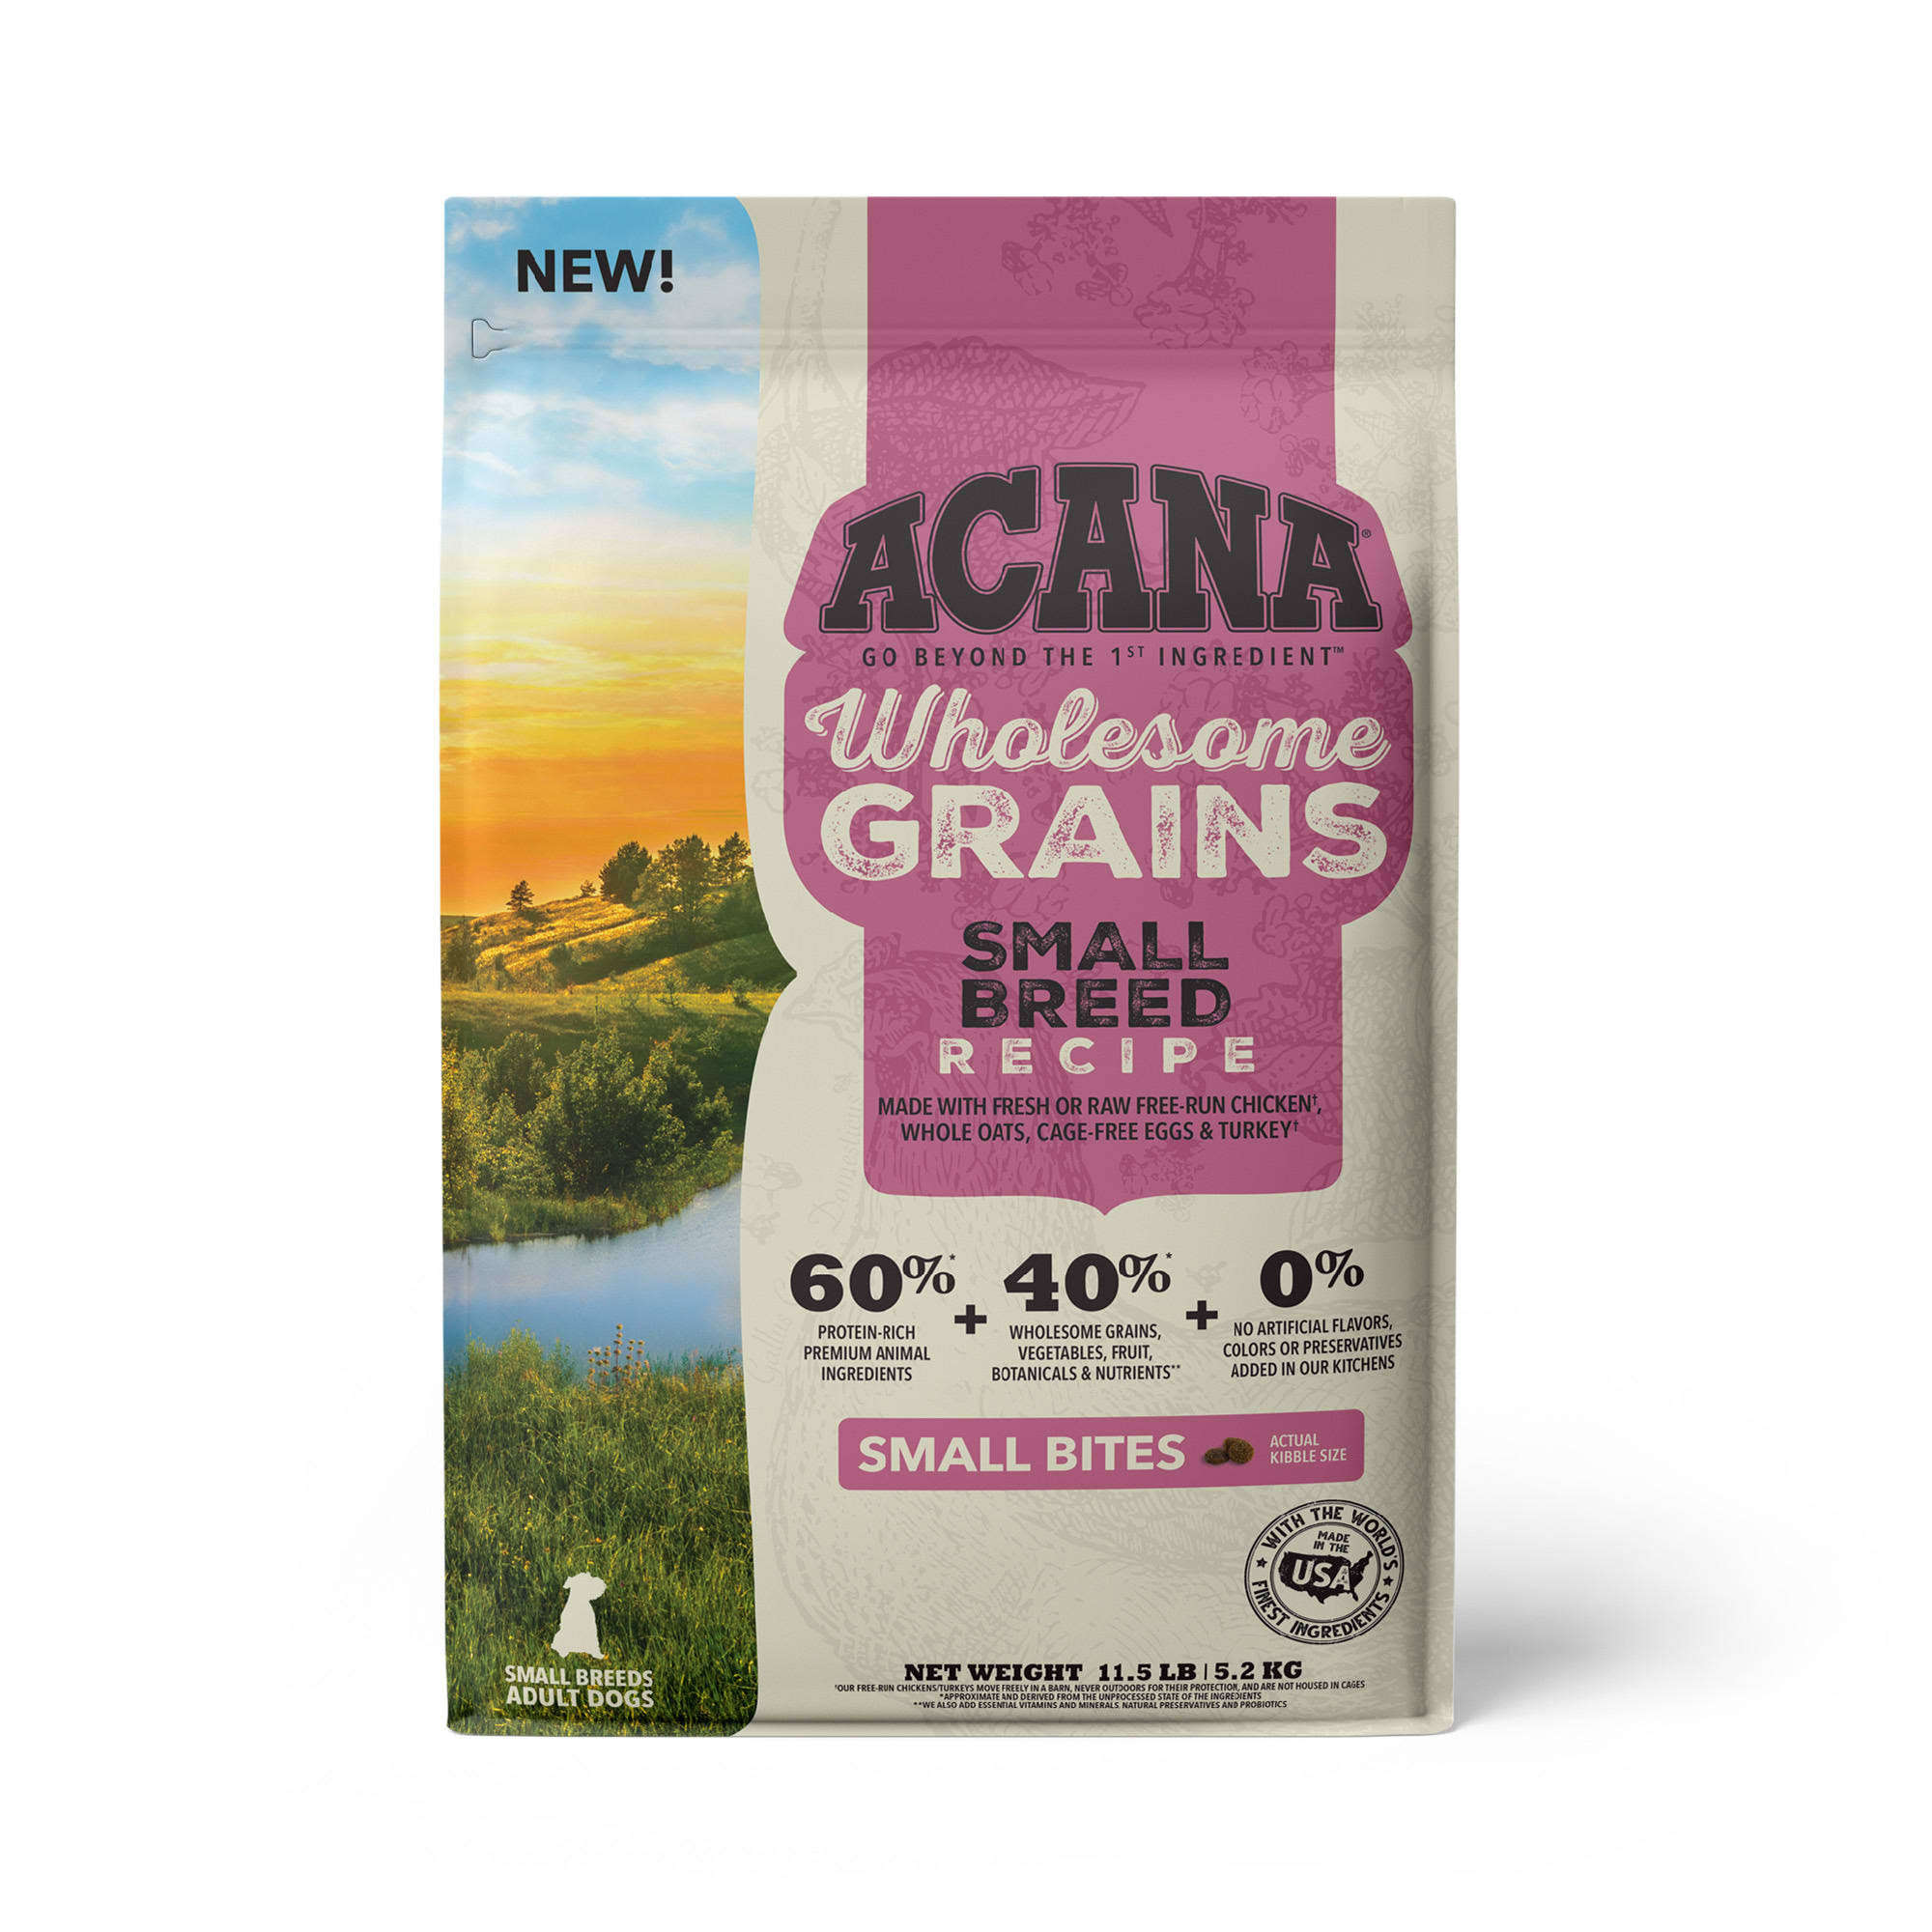 Acana Wholesome Grains Small Breed Recipe Dry Dog Food - 11.5 lb. Bag